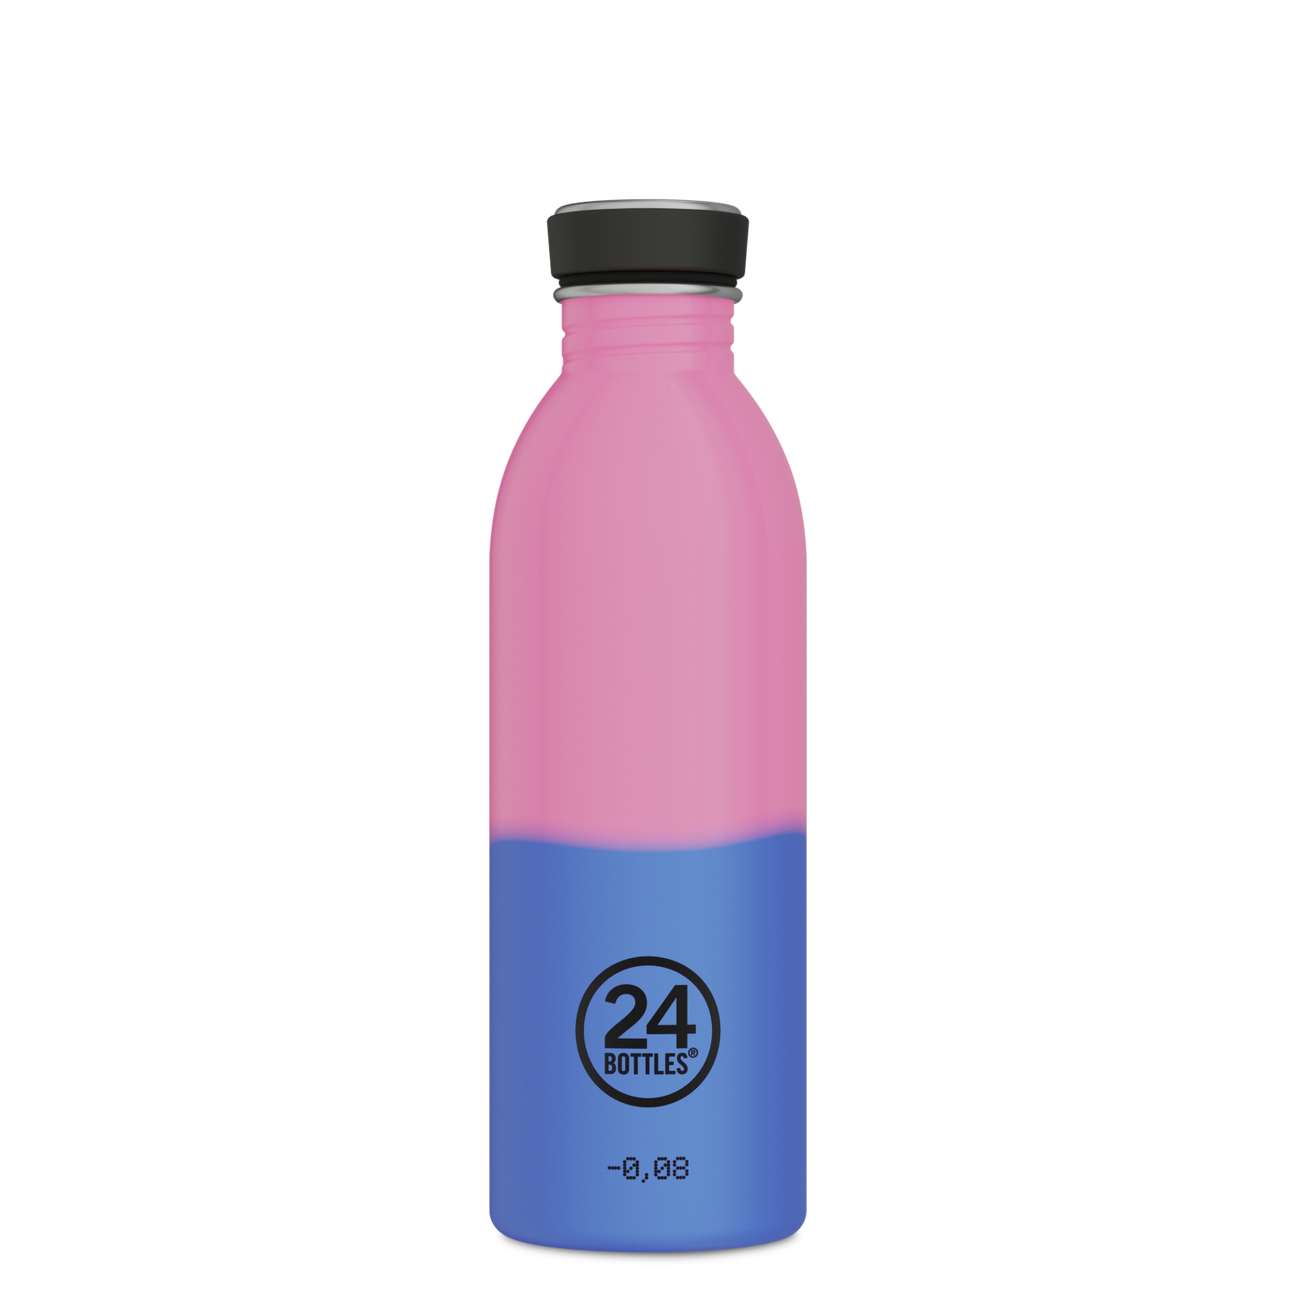 The new Spring-Summer 2023 Collection by 24Bottles